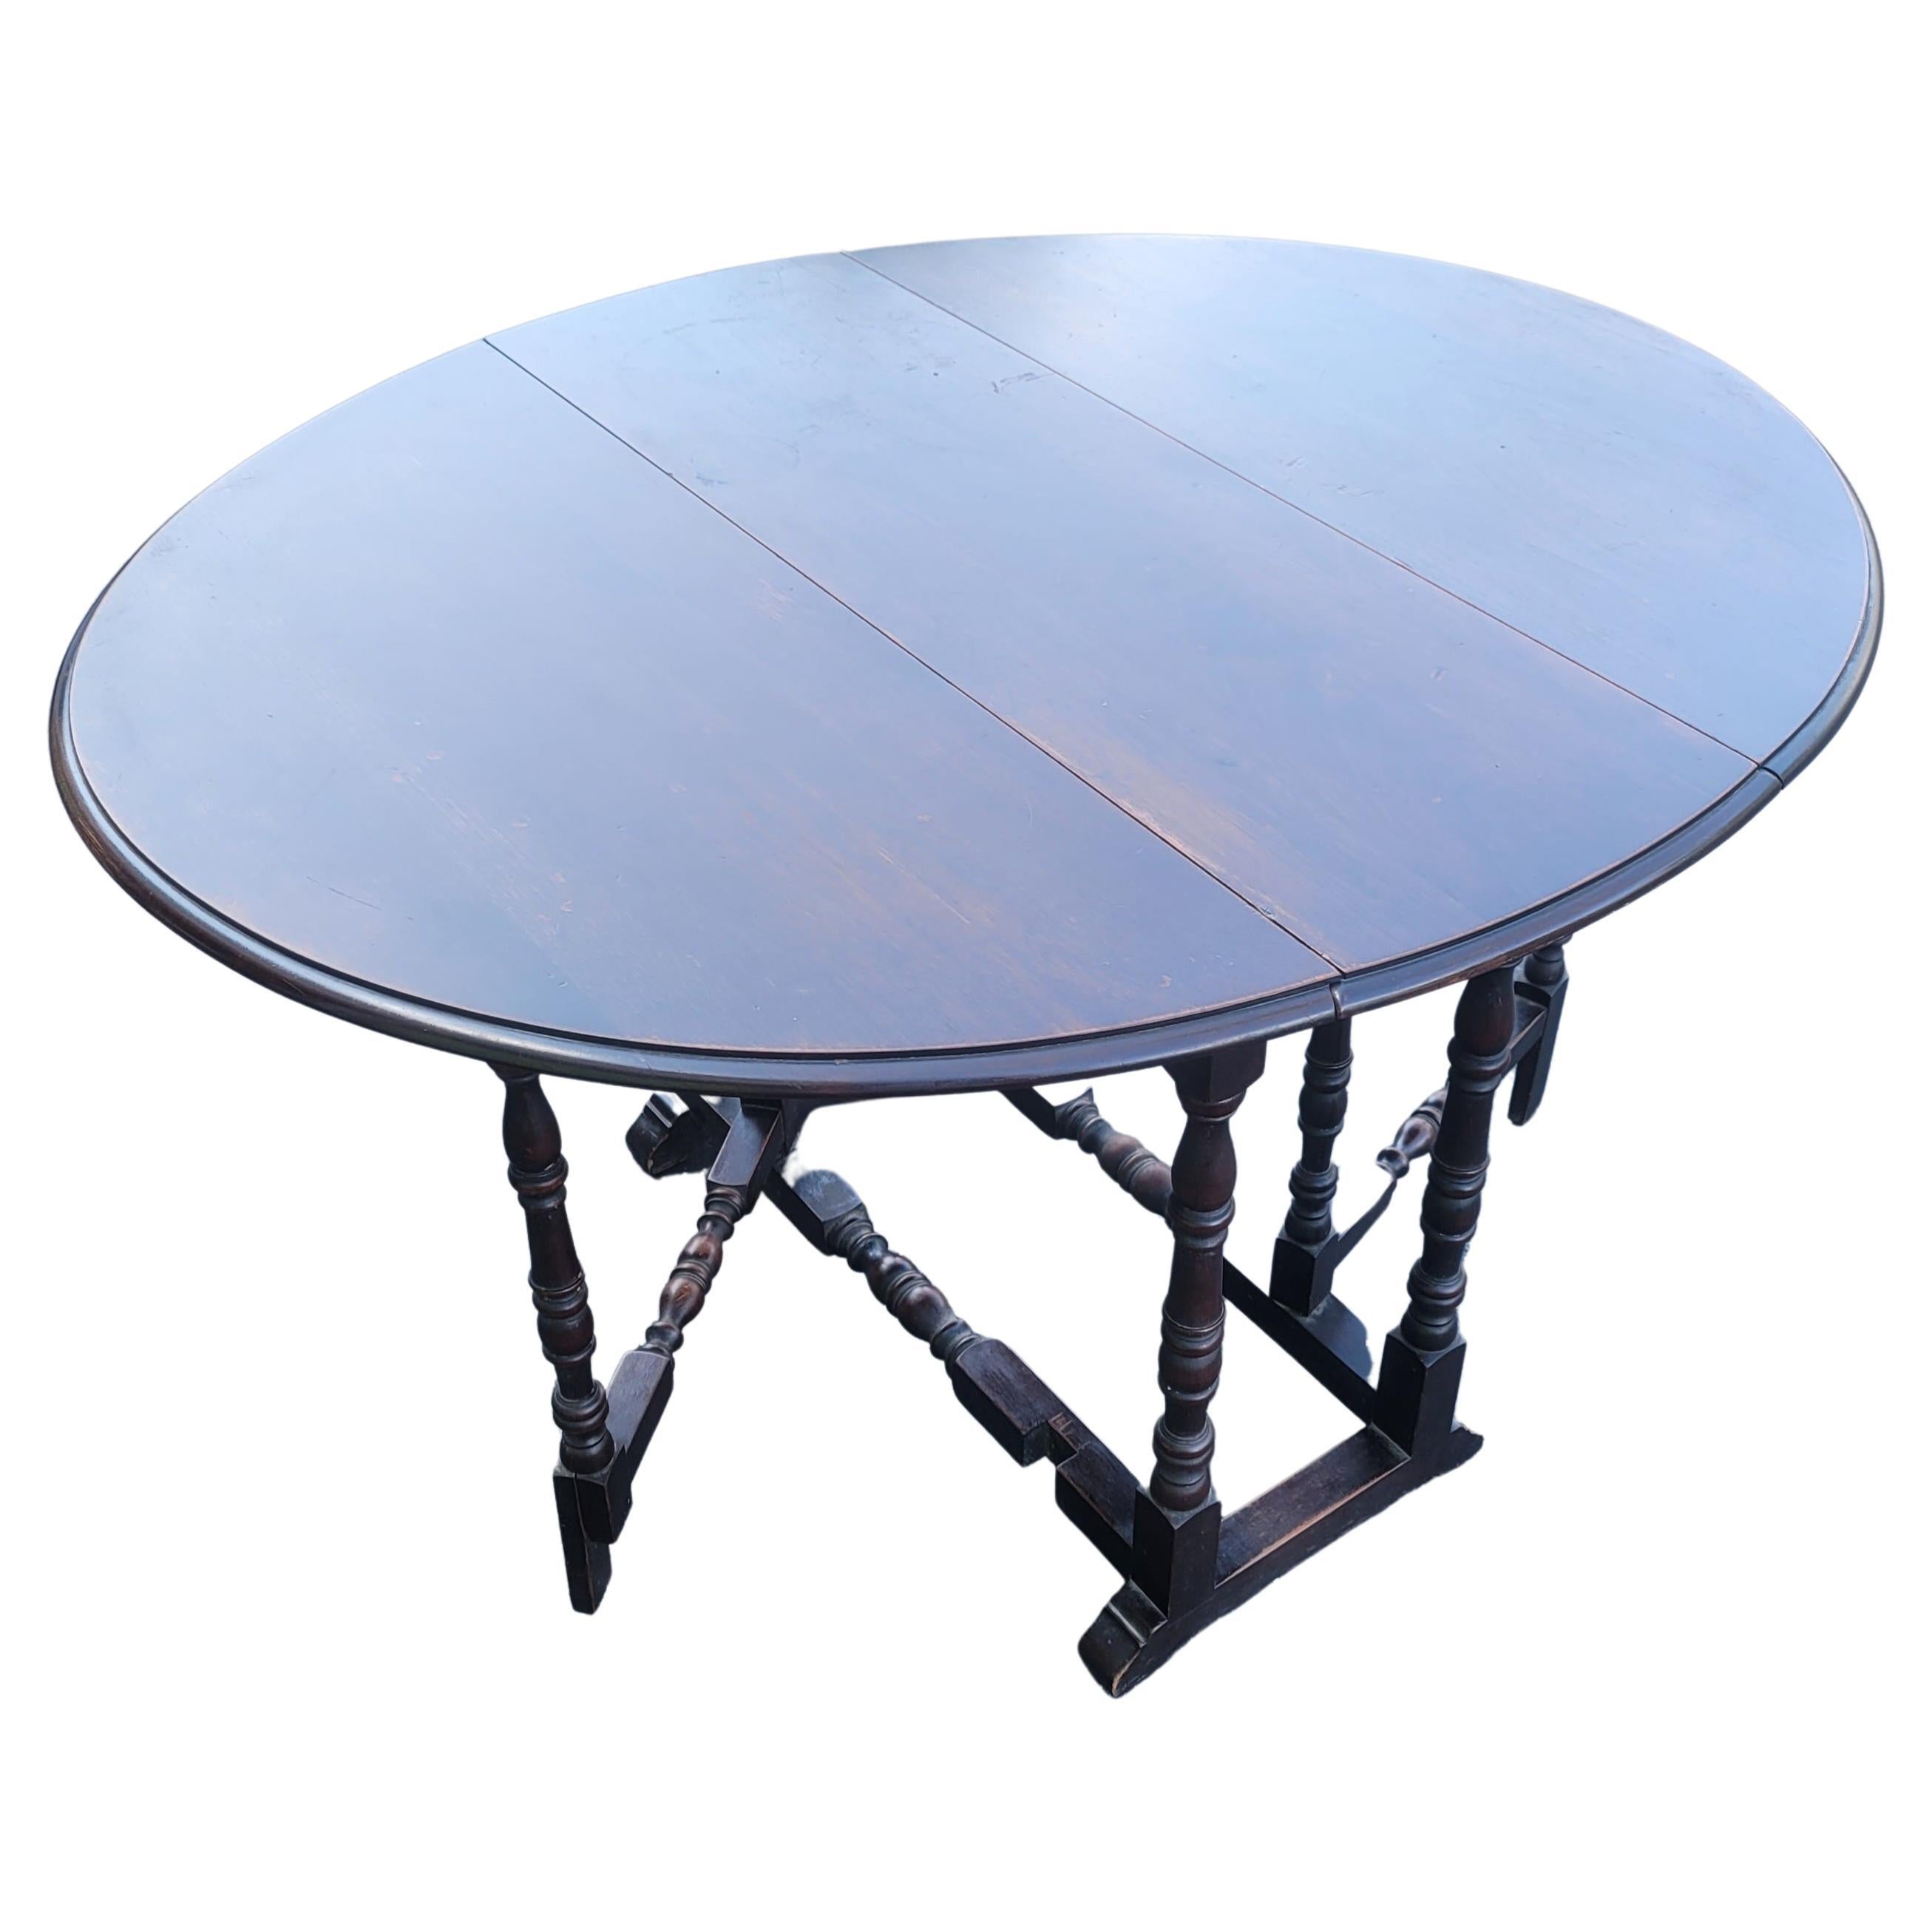 Antique Walnut Gatelegs Oval Table, Circa 1910s For Sale